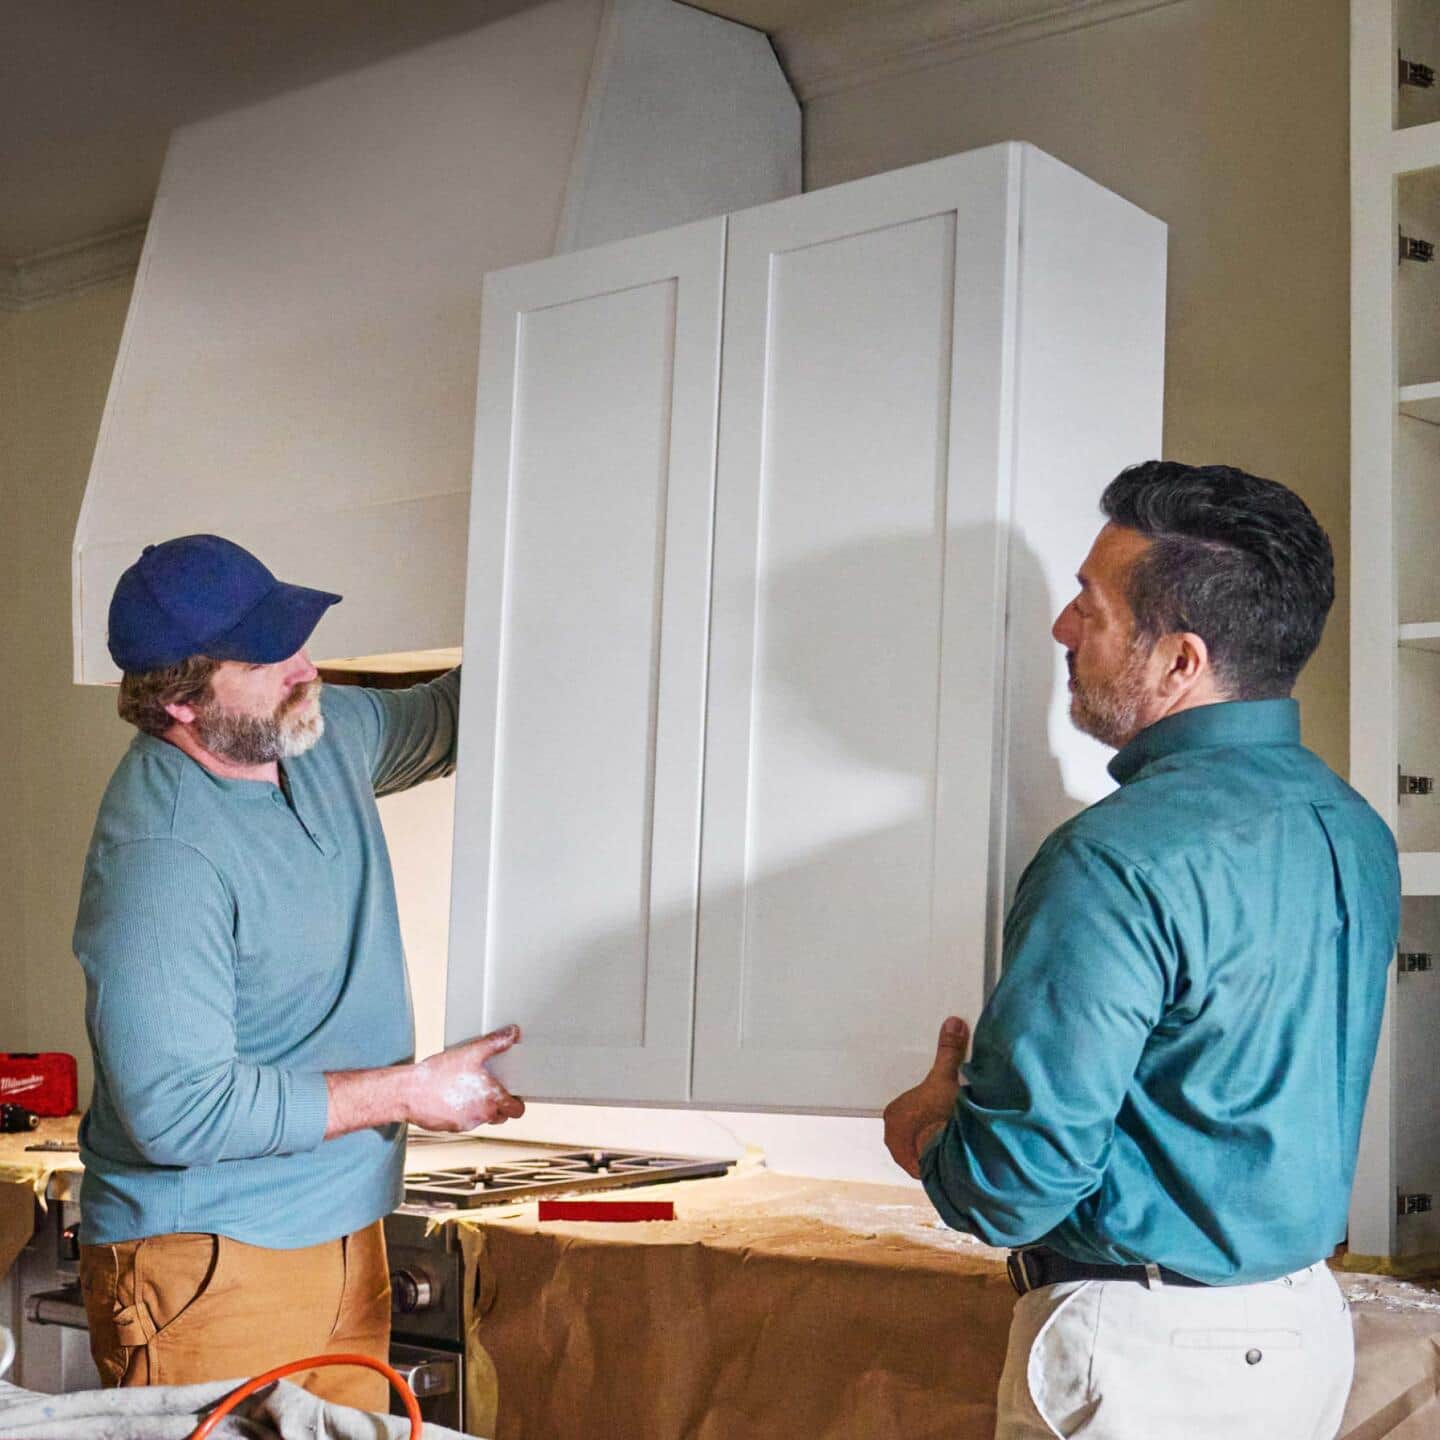 9 Things Remodeling Customers Are Looking For